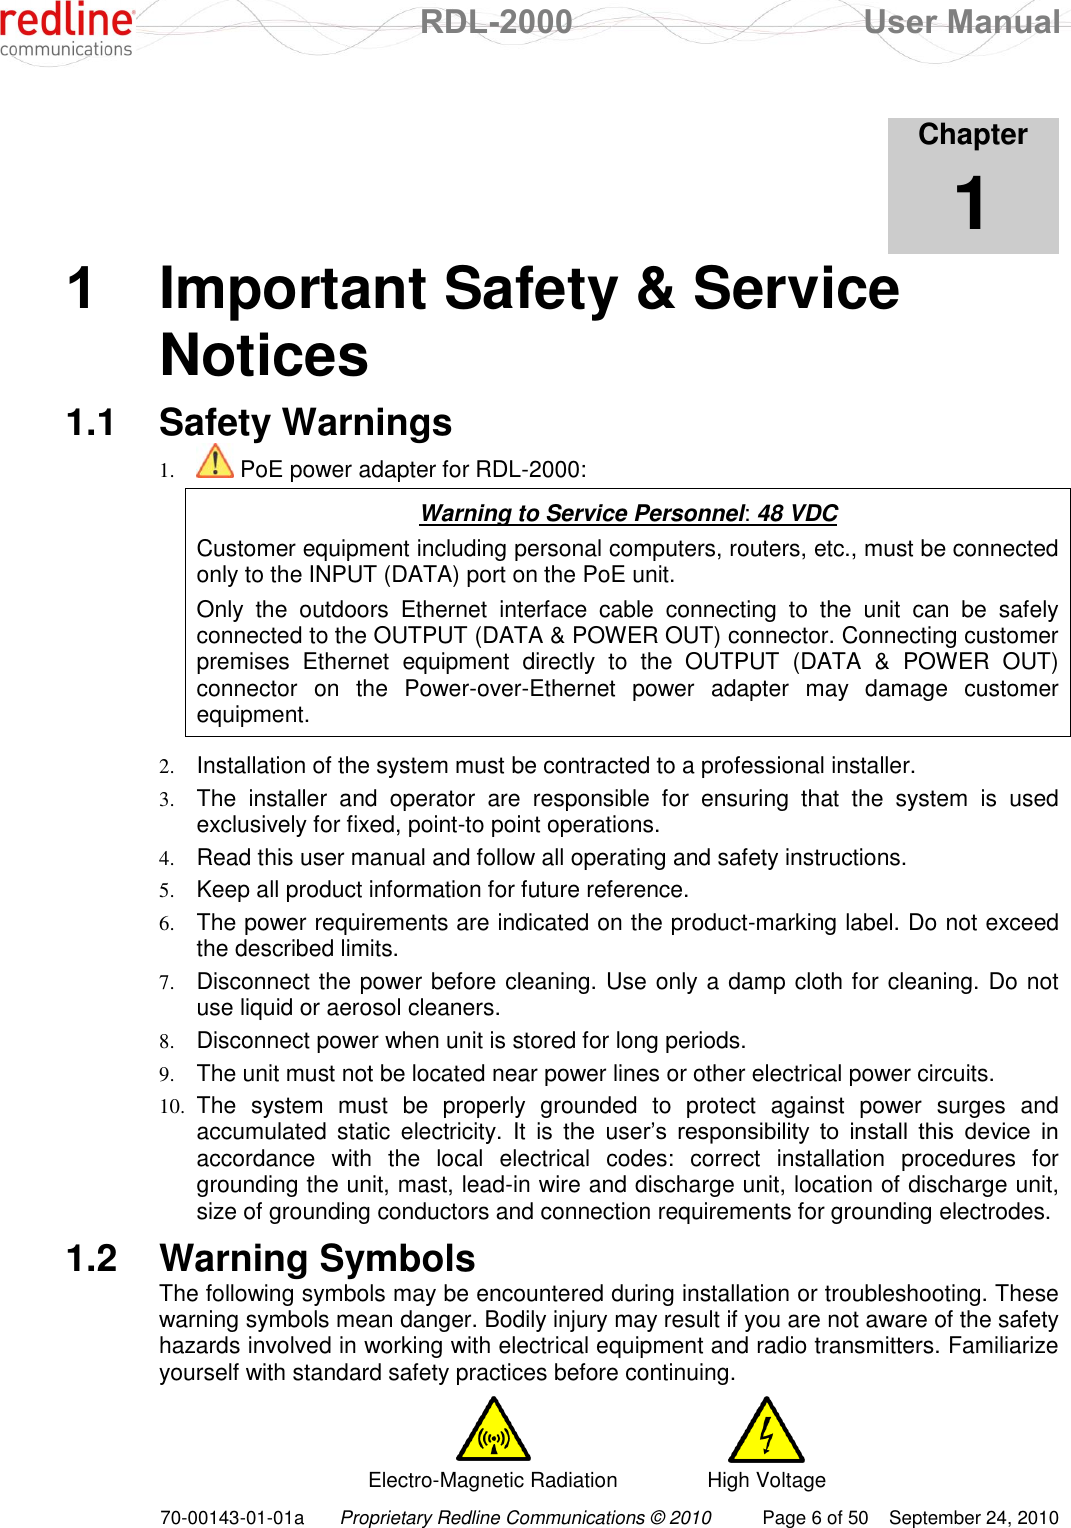  RDL-2000  User Manual 70-00143-01-01a Proprietary Redline Communications © 2010  Page 6 of 50  September 24, 2010            Chapter 1 1  Important Safety &amp; Service Notices 1.1  Safety Warnings 1.  PoE power adapter for RDL-2000:  Warning to Service Personnel: 48 VDC Customer equipment including personal computers, routers, etc., must be connected only to the INPUT (DATA) port on the PoE unit.  Only  the  outdoors  Ethernet  interface  cable  connecting  to  the  unit  can  be  safely connected to the OUTPUT (DATA &amp; POWER OUT) connector. Connecting customer premises  Ethernet  equipment  directly  to  the  OUTPUT  (DATA  &amp;  POWER  OUT) connector  on  the  Power-over-Ethernet  power  adapter  may  damage  customer equipment.  2. Installation of the system must be contracted to a professional installer. 3. The  installer  and  operator  are  responsible  for  ensuring  that  the  system  is  used exclusively for fixed, point-to point operations. 4. Read this user manual and follow all operating and safety instructions. 5. Keep all product information for future reference. 6. The power requirements are indicated on the product-marking label. Do not exceed the described limits. 7. Disconnect the power before cleaning. Use only a damp cloth for cleaning. Do not use liquid or aerosol cleaners.  8. Disconnect power when unit is stored for long periods. 9. The unit must not be located near power lines or other electrical power circuits. 10. The  system  must  be  properly  grounded  to  protect  against  power  surges  and accumulated  static  electricity.  It  is  the  user‟s  responsibility  to  install  this  device  in accordance  with  the  local  electrical  codes:  correct  installation  procedures  for grounding the unit, mast, lead-in wire and discharge unit, location of discharge unit, size of grounding conductors and connection requirements for grounding electrodes. 1.2  Warning Symbols The following symbols may be encountered during installation or troubleshooting. These warning symbols mean danger. Bodily injury may result if you are not aware of the safety hazards involved in working with electrical equipment and radio transmitters. Familiarize yourself with standard safety practices before continuing.   Electro-Magnetic Radiation High Voltage 